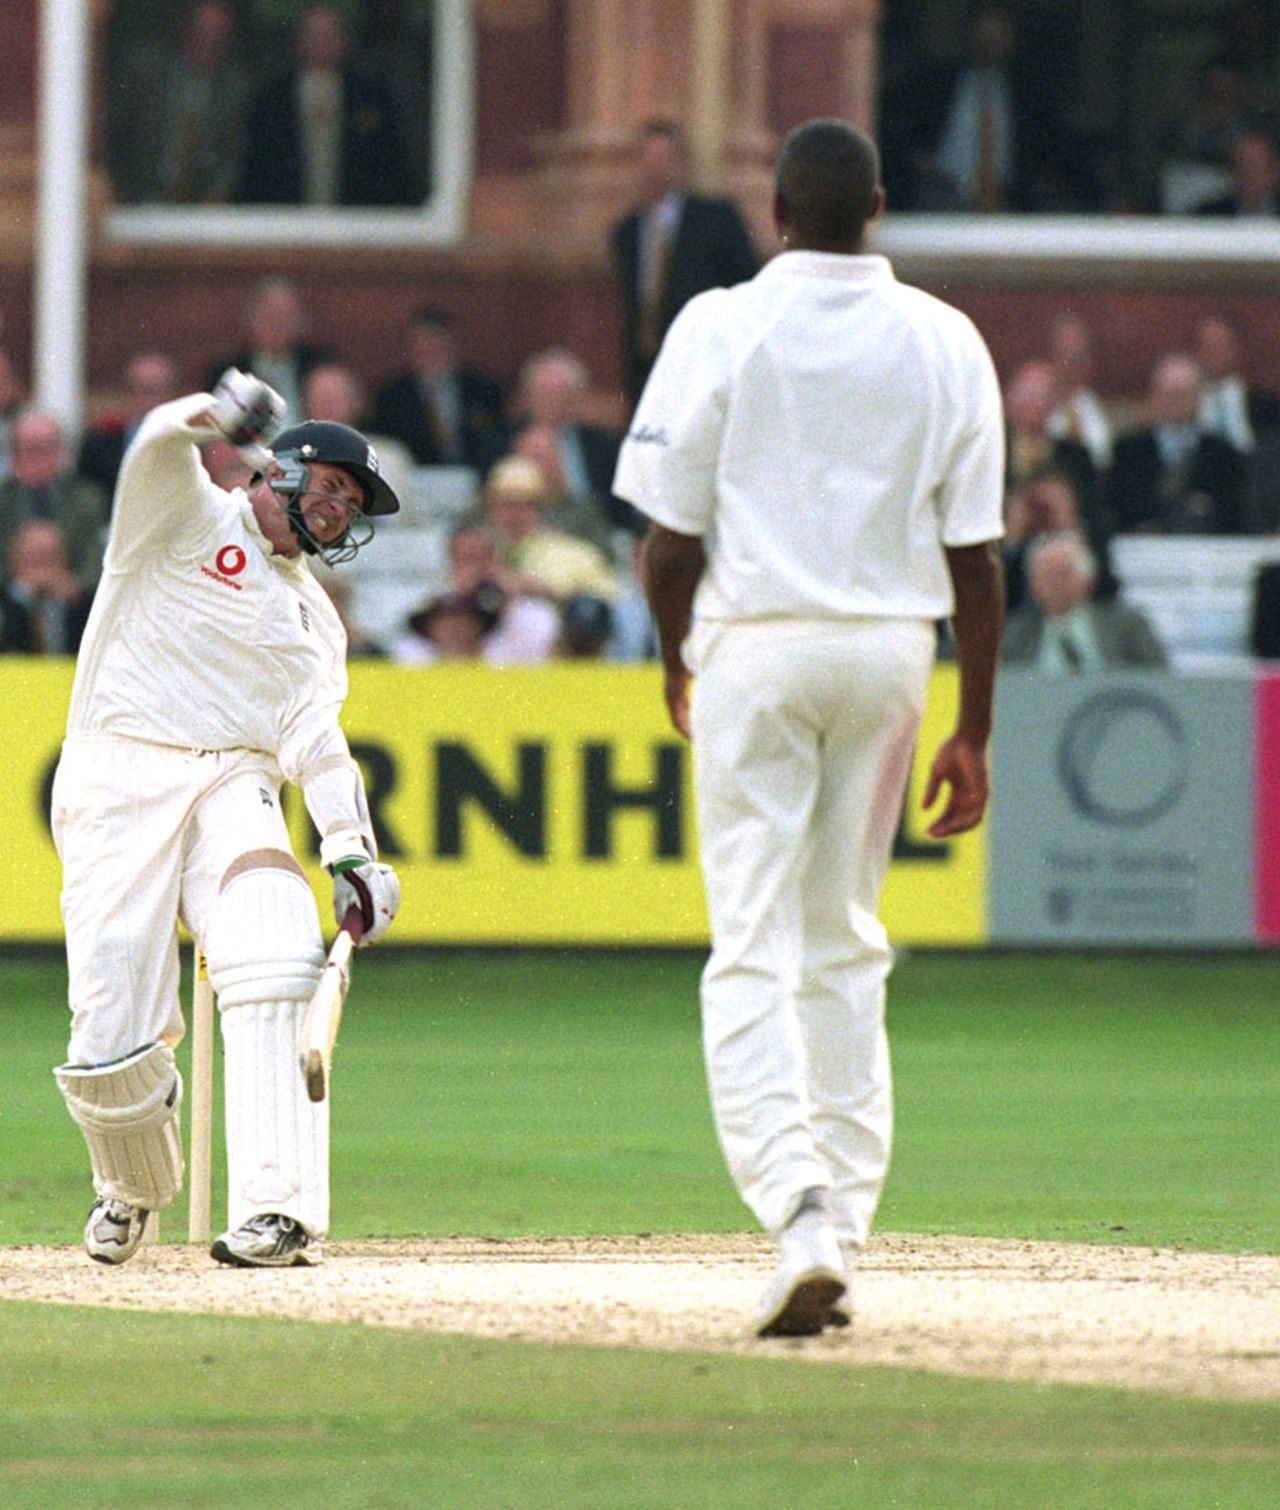 Dominic Cork celebrates after hitting the winning runs against West Indies, England v West Indies, 2nd Test, Lord's, 3rd day, July 1, 2000